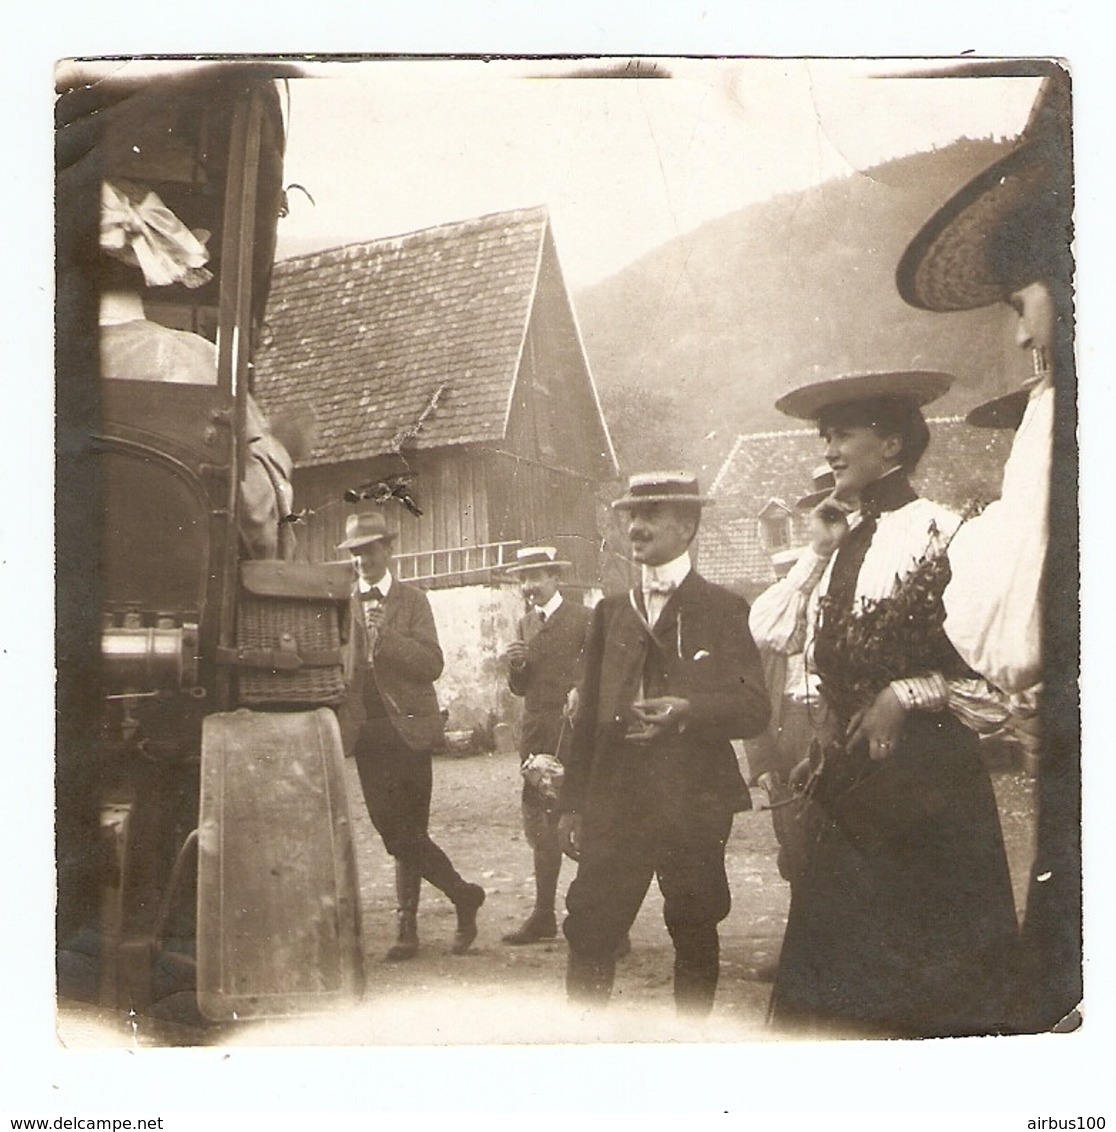 PHOTO ORIGINALE 1904 1905 PHOTOTHEQUE RADIODIFFUSION TELEVISION FRANCAISE - ALSACE BOURGEOIS BOURGOISE - Personnes Anonymes